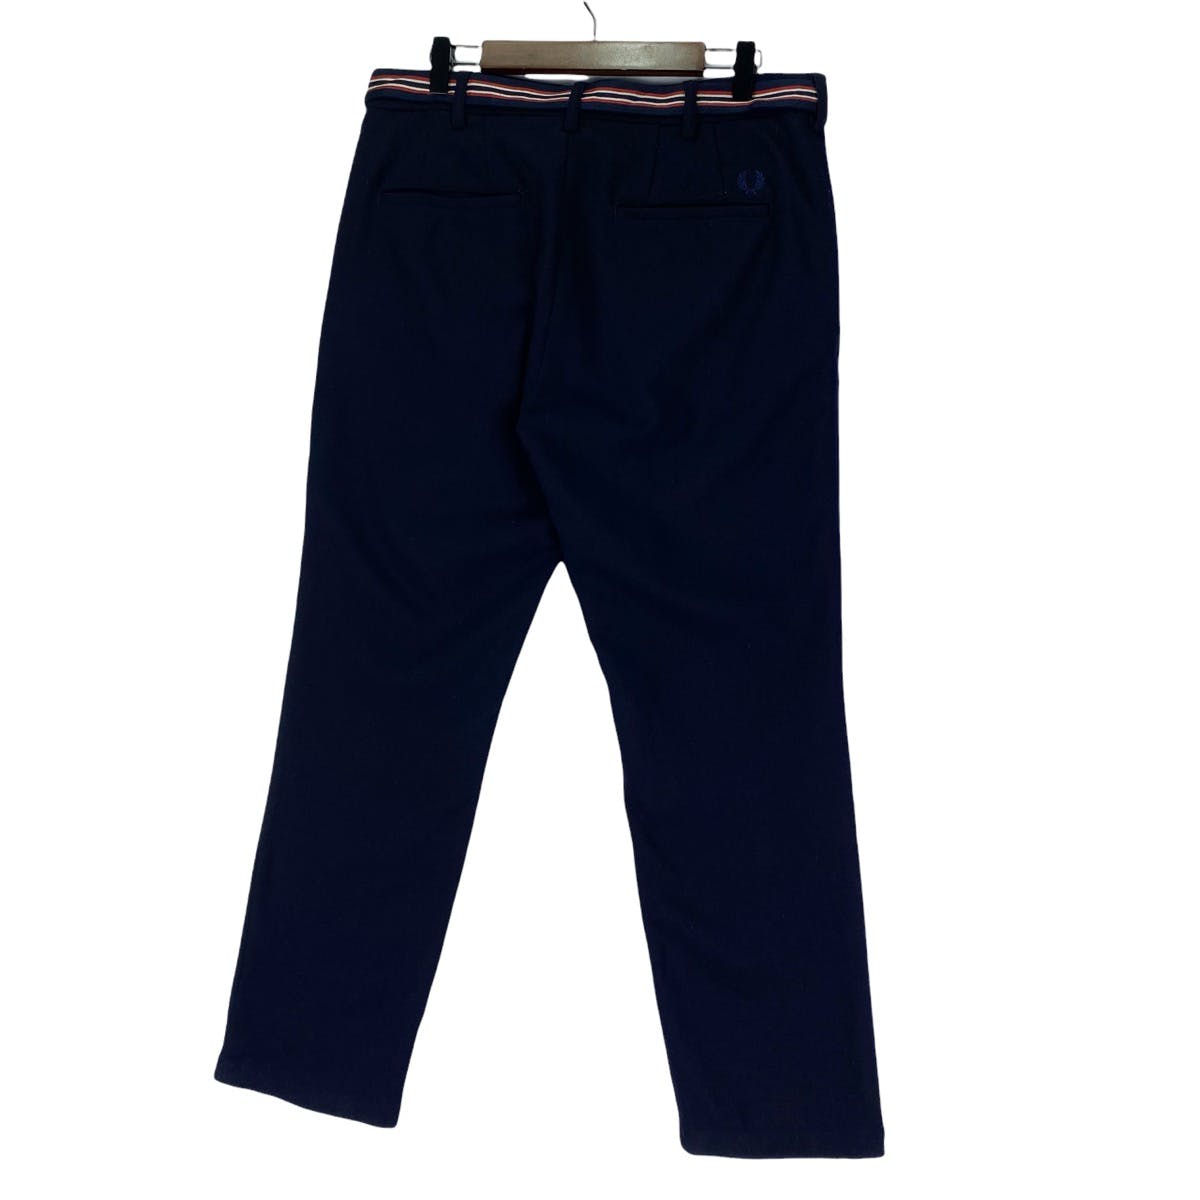 Fred Perry Navy Blue Trouser - 10